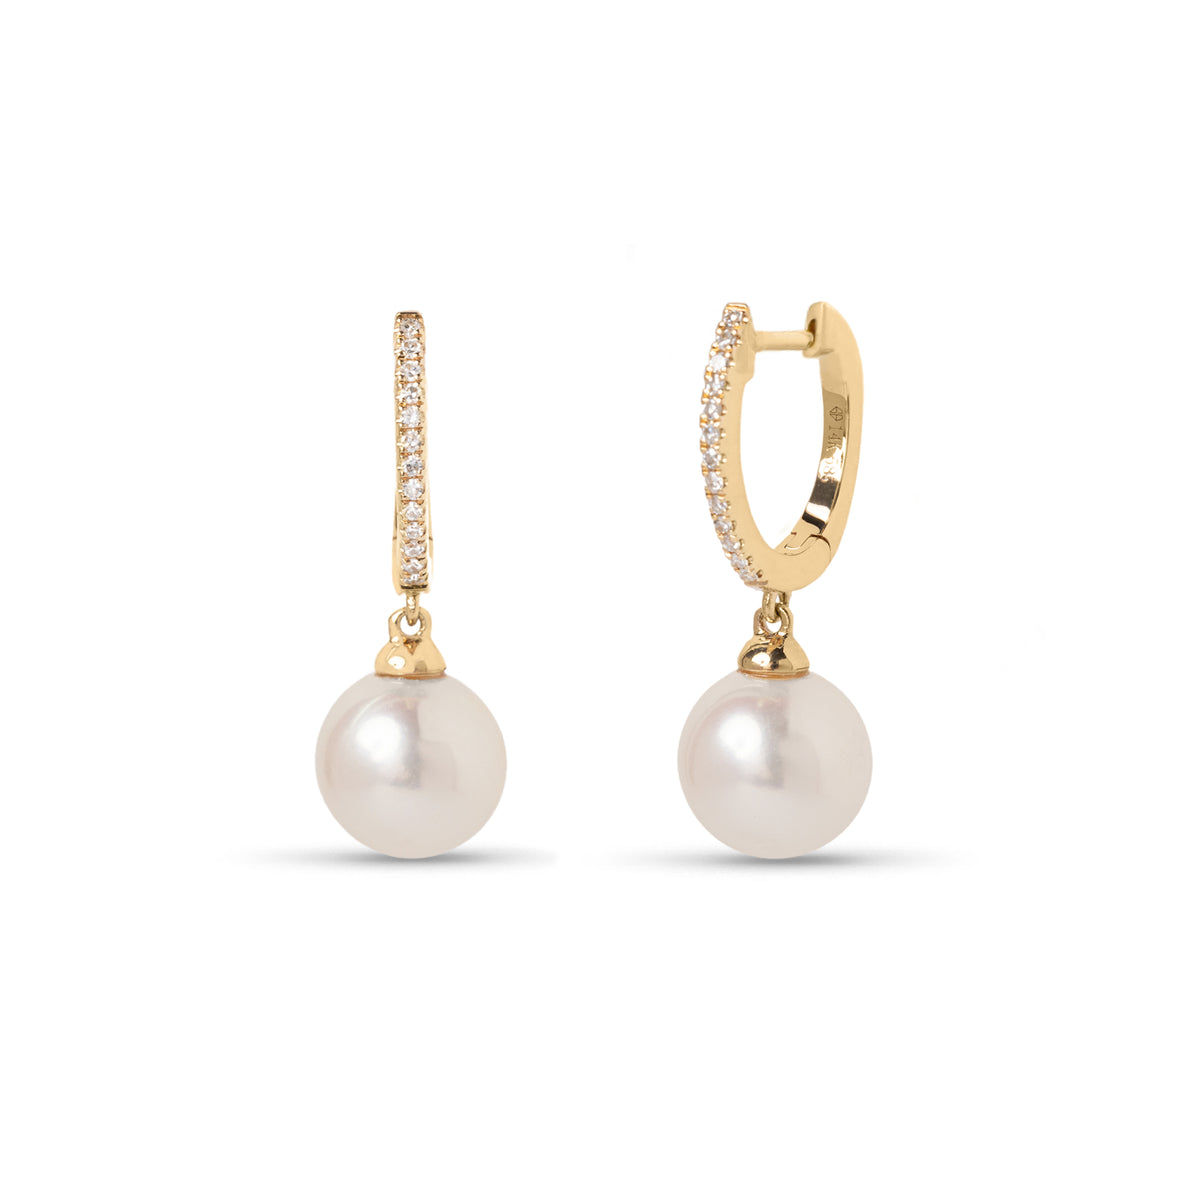 14k yellow or white gold diamond pave huggies with pearl drop earrings